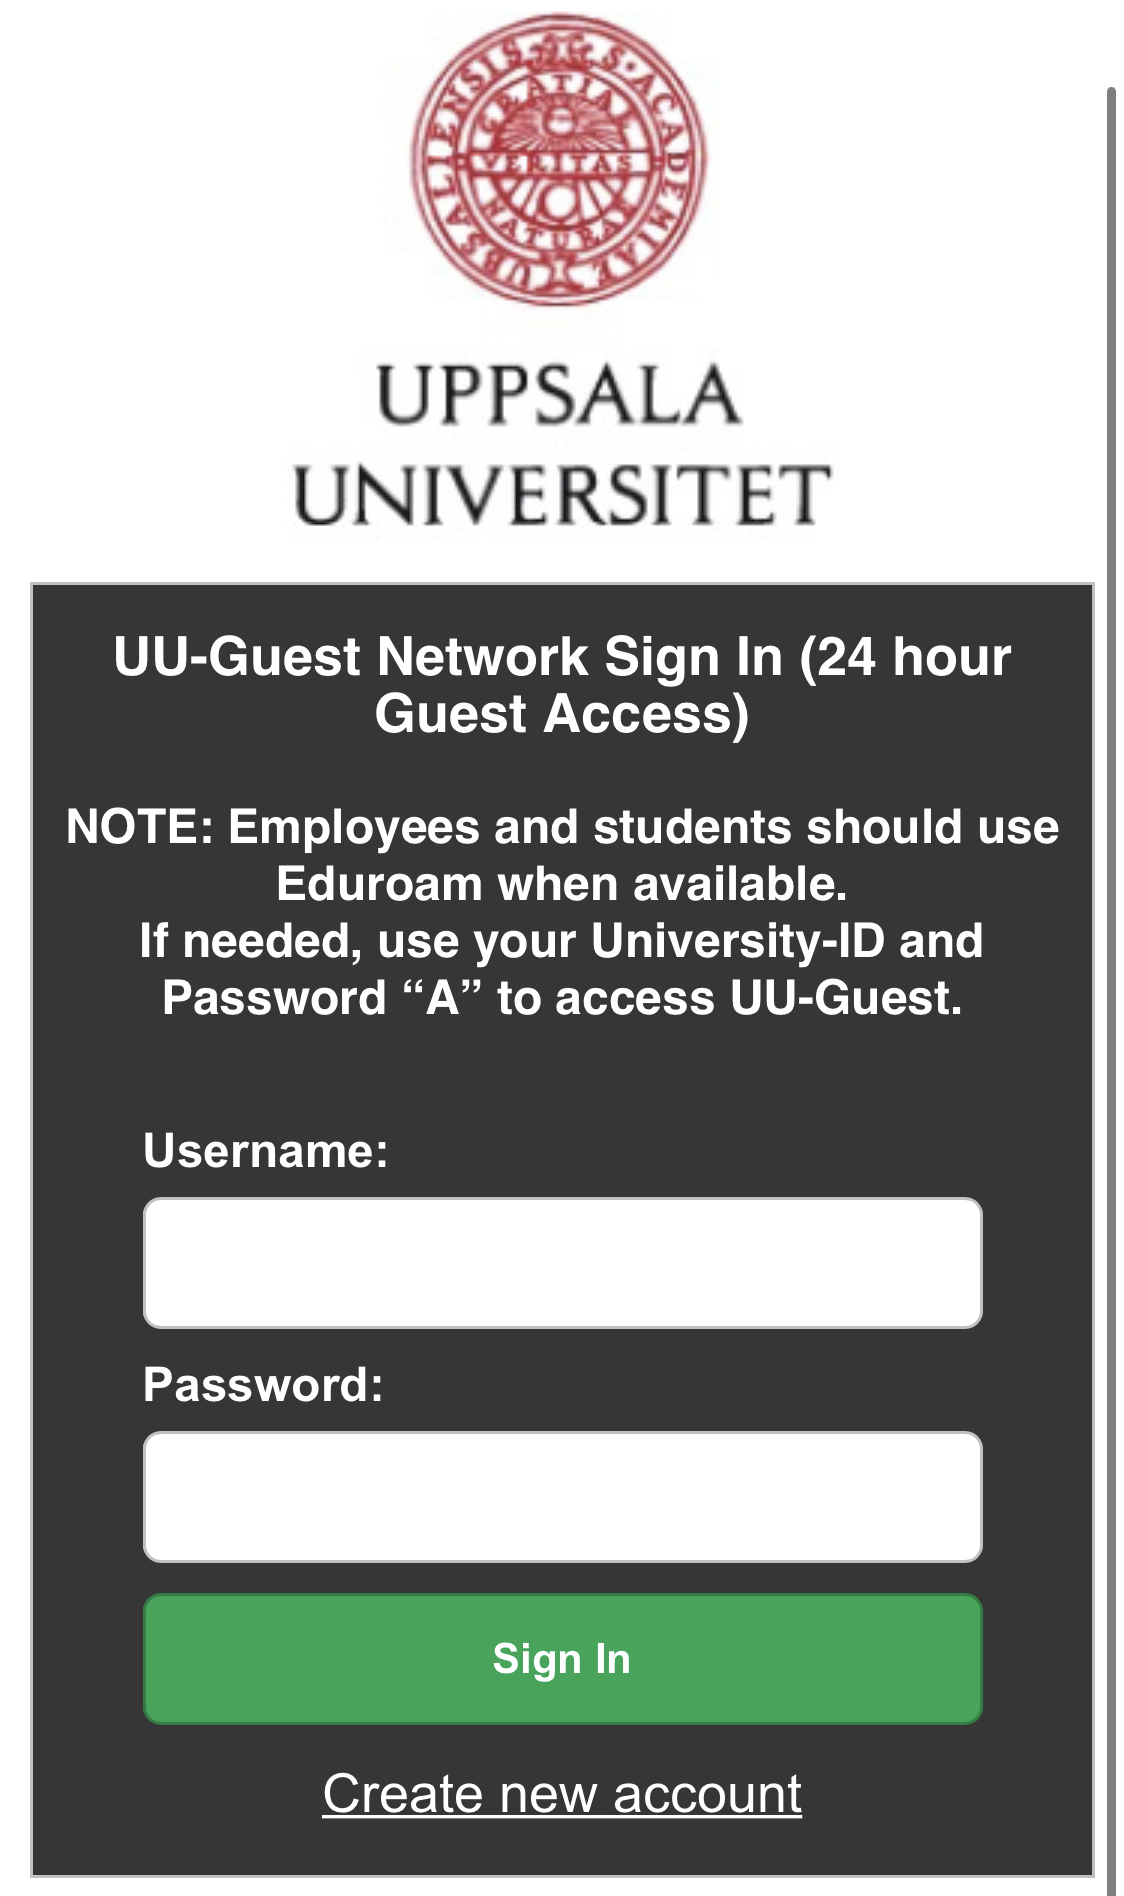 The login window with the header UU-Guest Network Sign In (24 hour Guest Access).